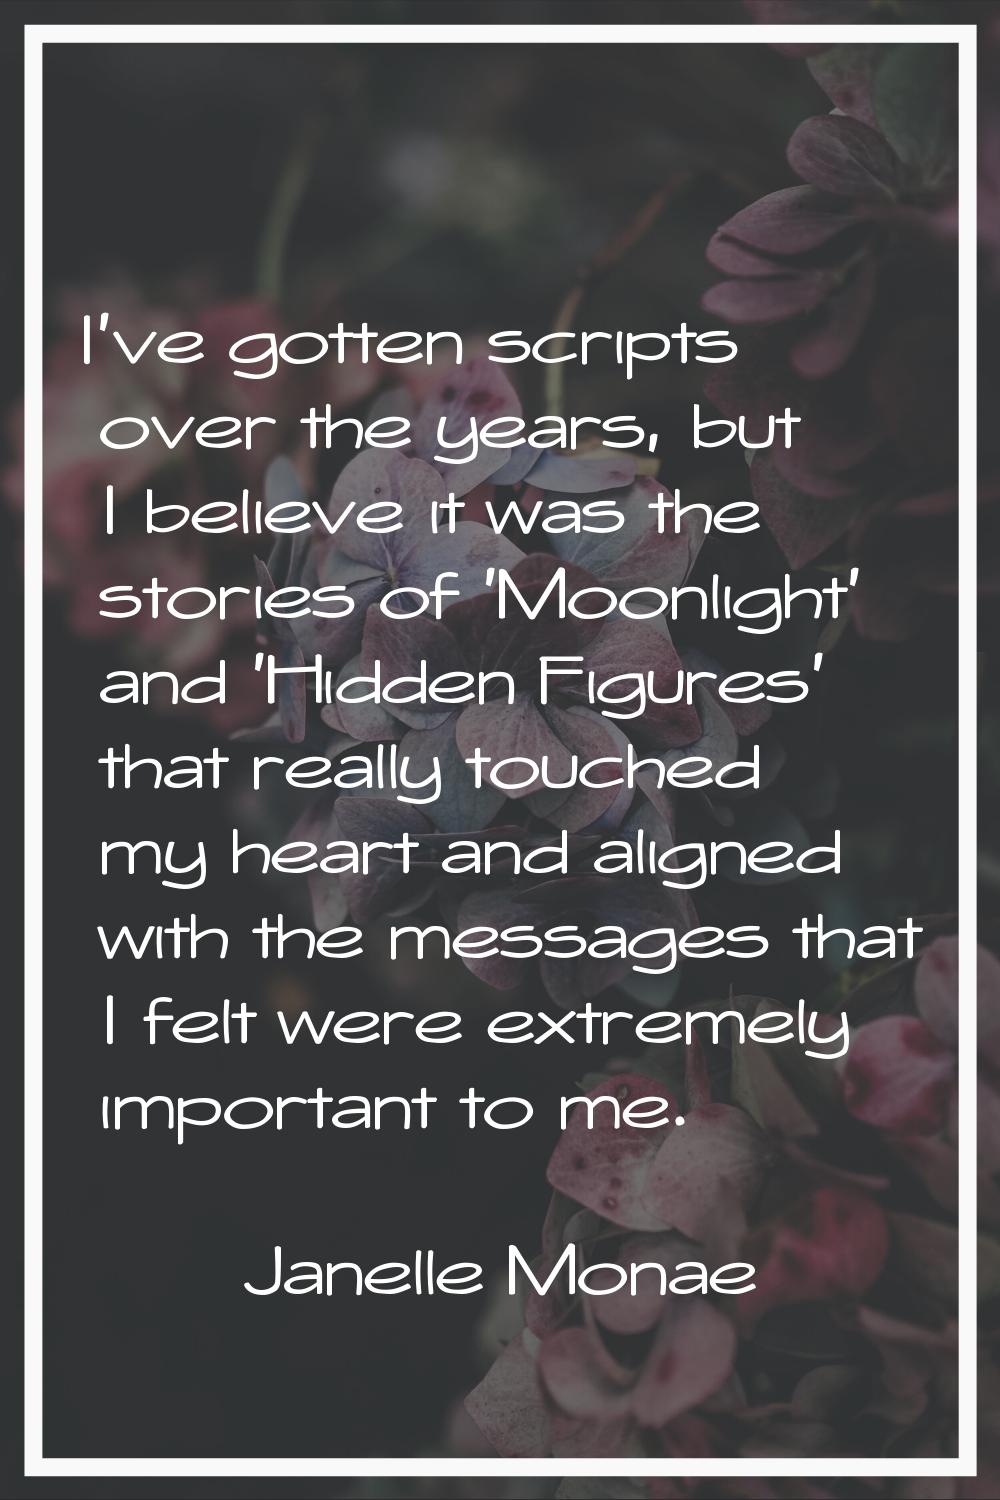 I've gotten scripts over the years, but I believe it was the stories of 'Moonlight' and 'Hidden Fig